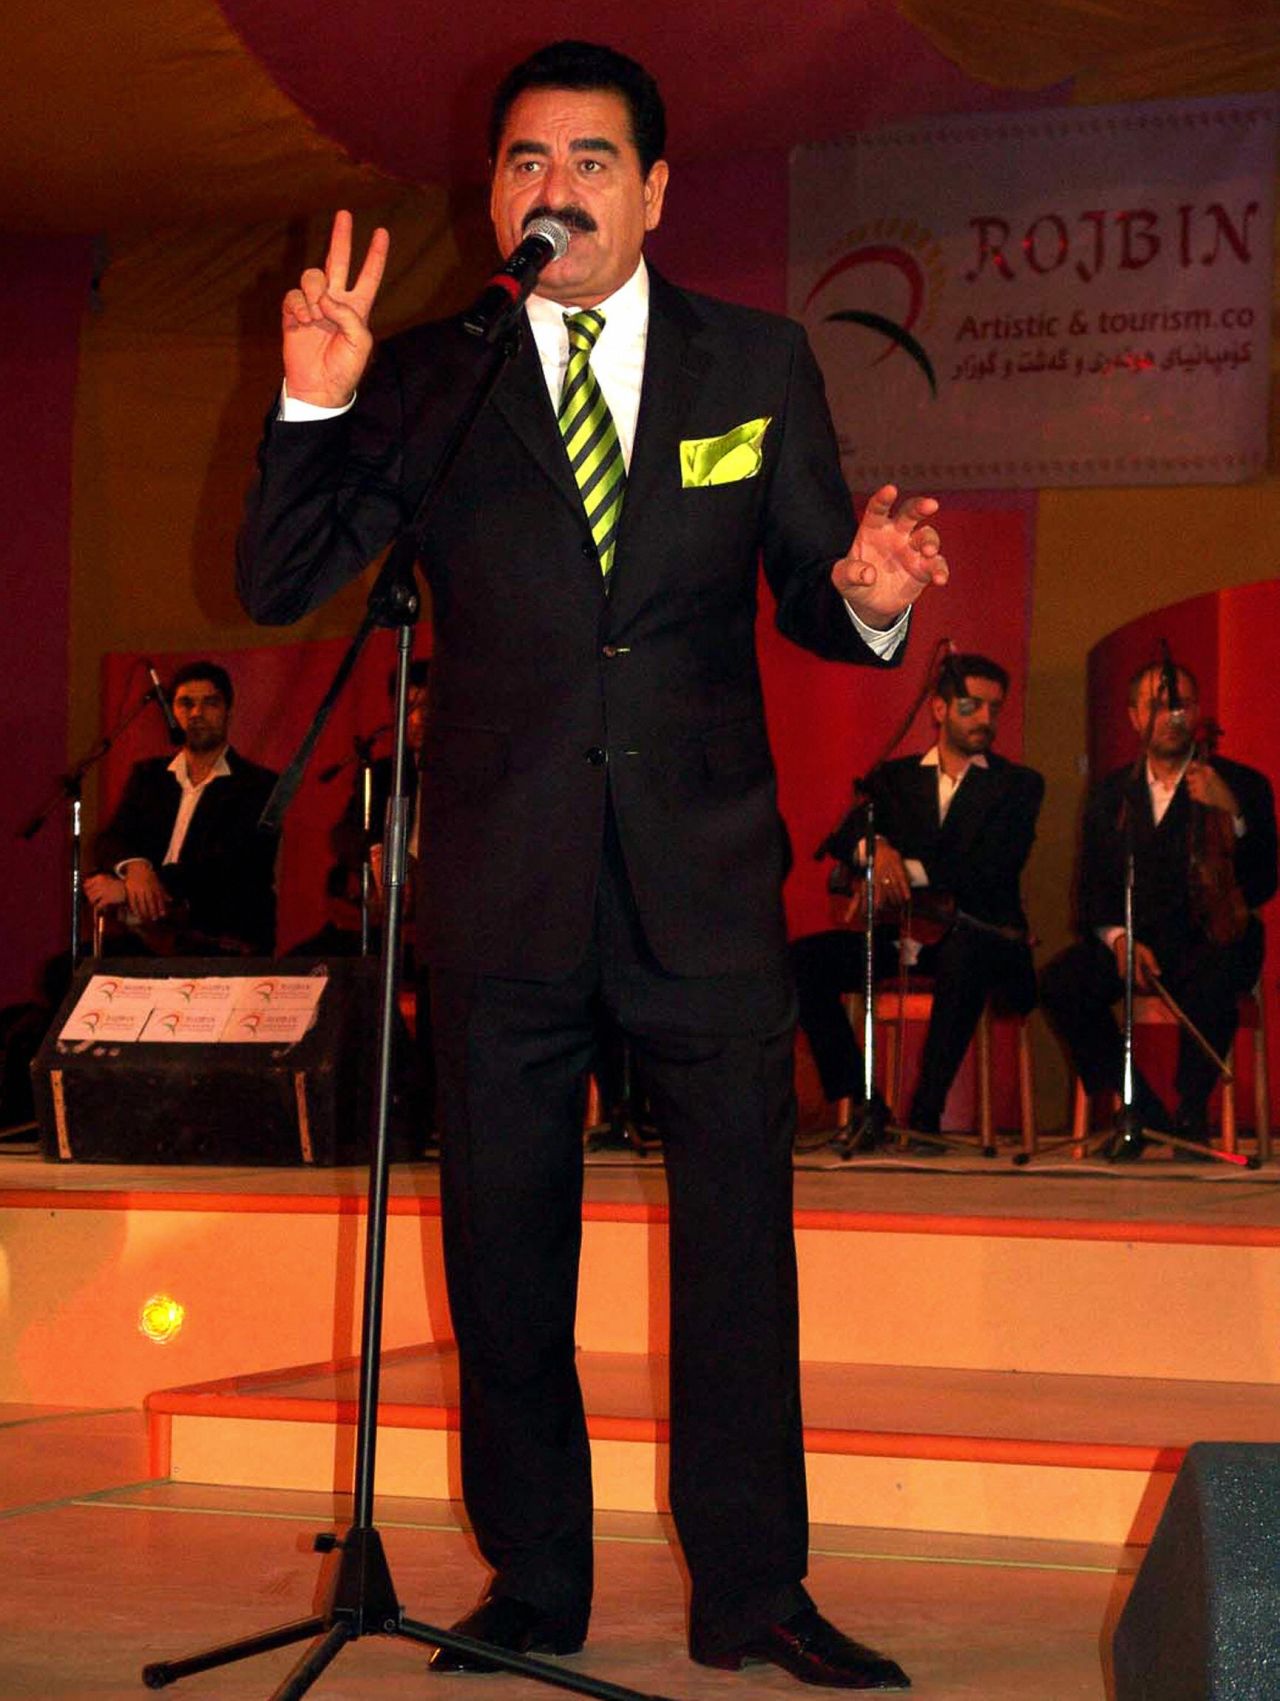 Ibrahim Tatlises, a popular Turkish singer and actor of Kurdish and Arab descent, has the type of moustache sought by Middle Eastern men seeking transplants. Men from the region are fuelling a boom in mustache transplants as they seek a more virile appearance through their facial hair.